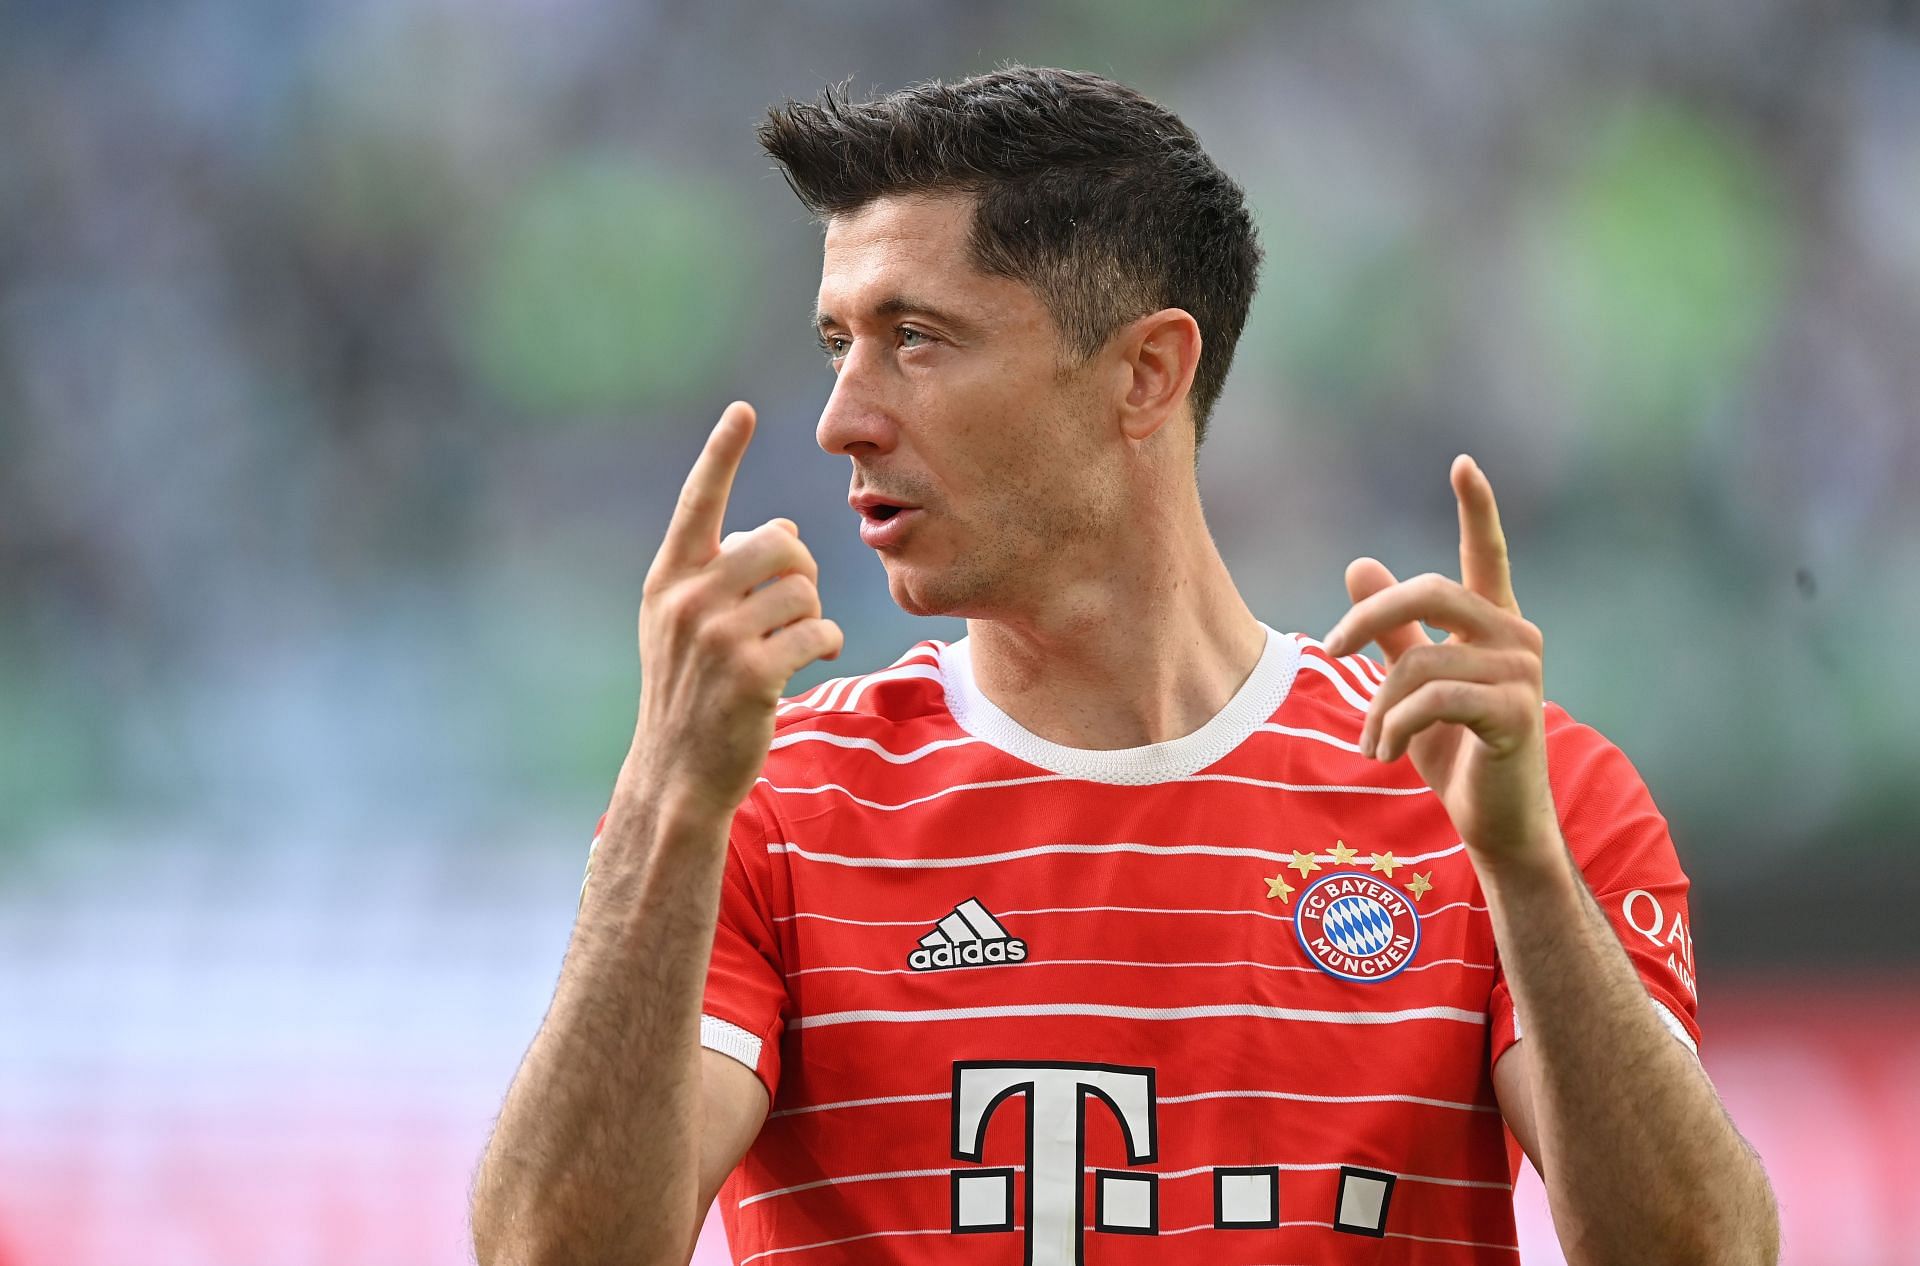 Robert Lewandowski is one of the standout strikers in the history of the game